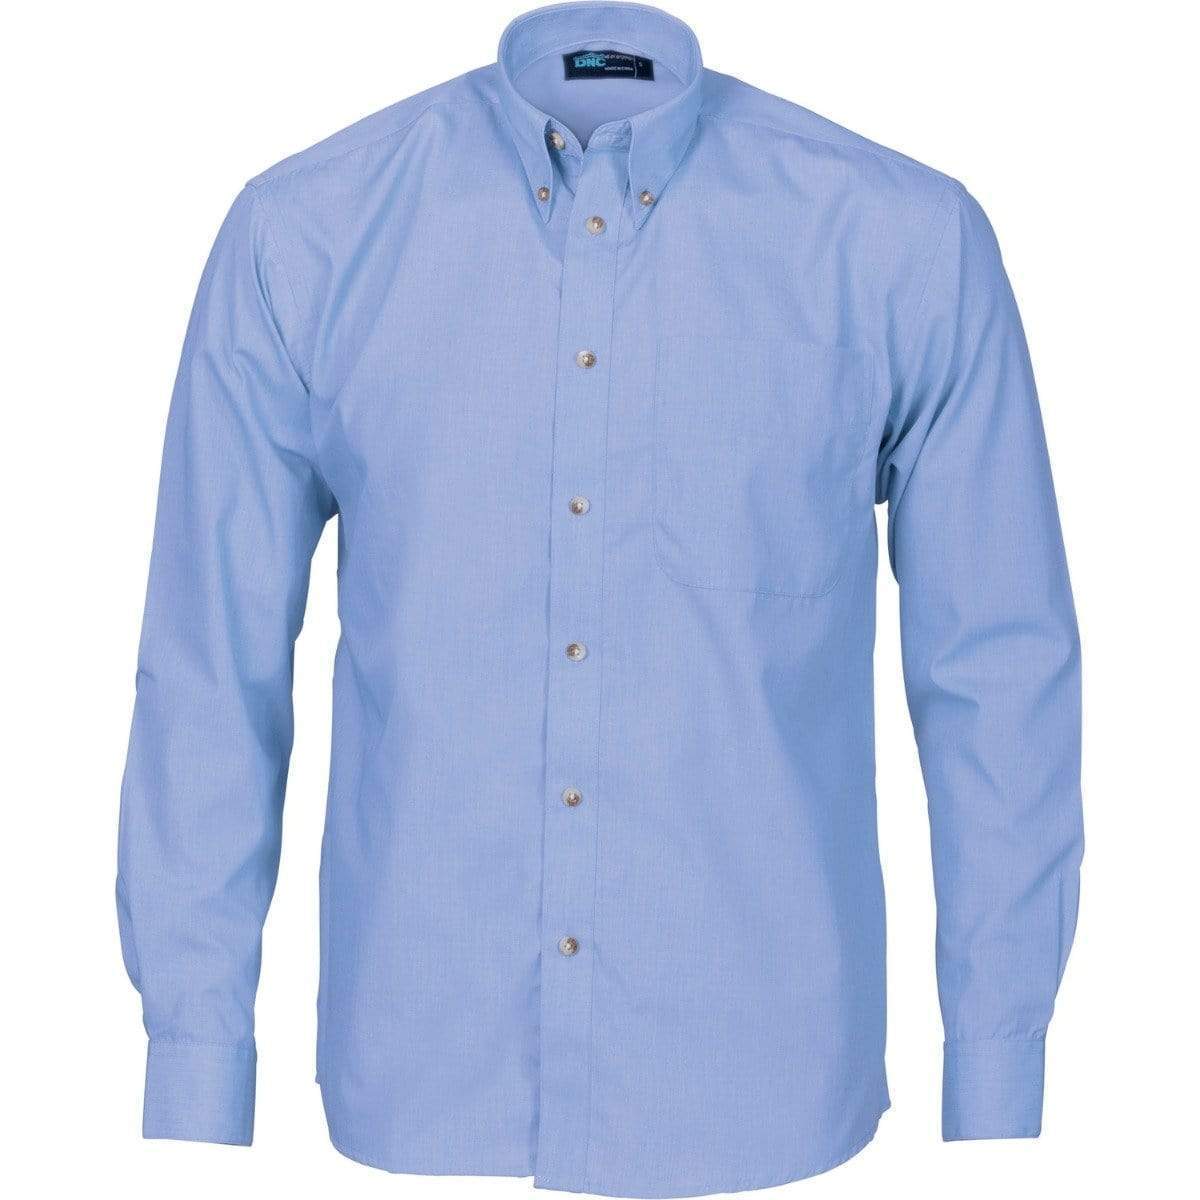 DNC Workwear Work Wear Chambray / S DNC WORKWEAR Polyester Cotton Chambray Long Sleeve Business Shirt 4122